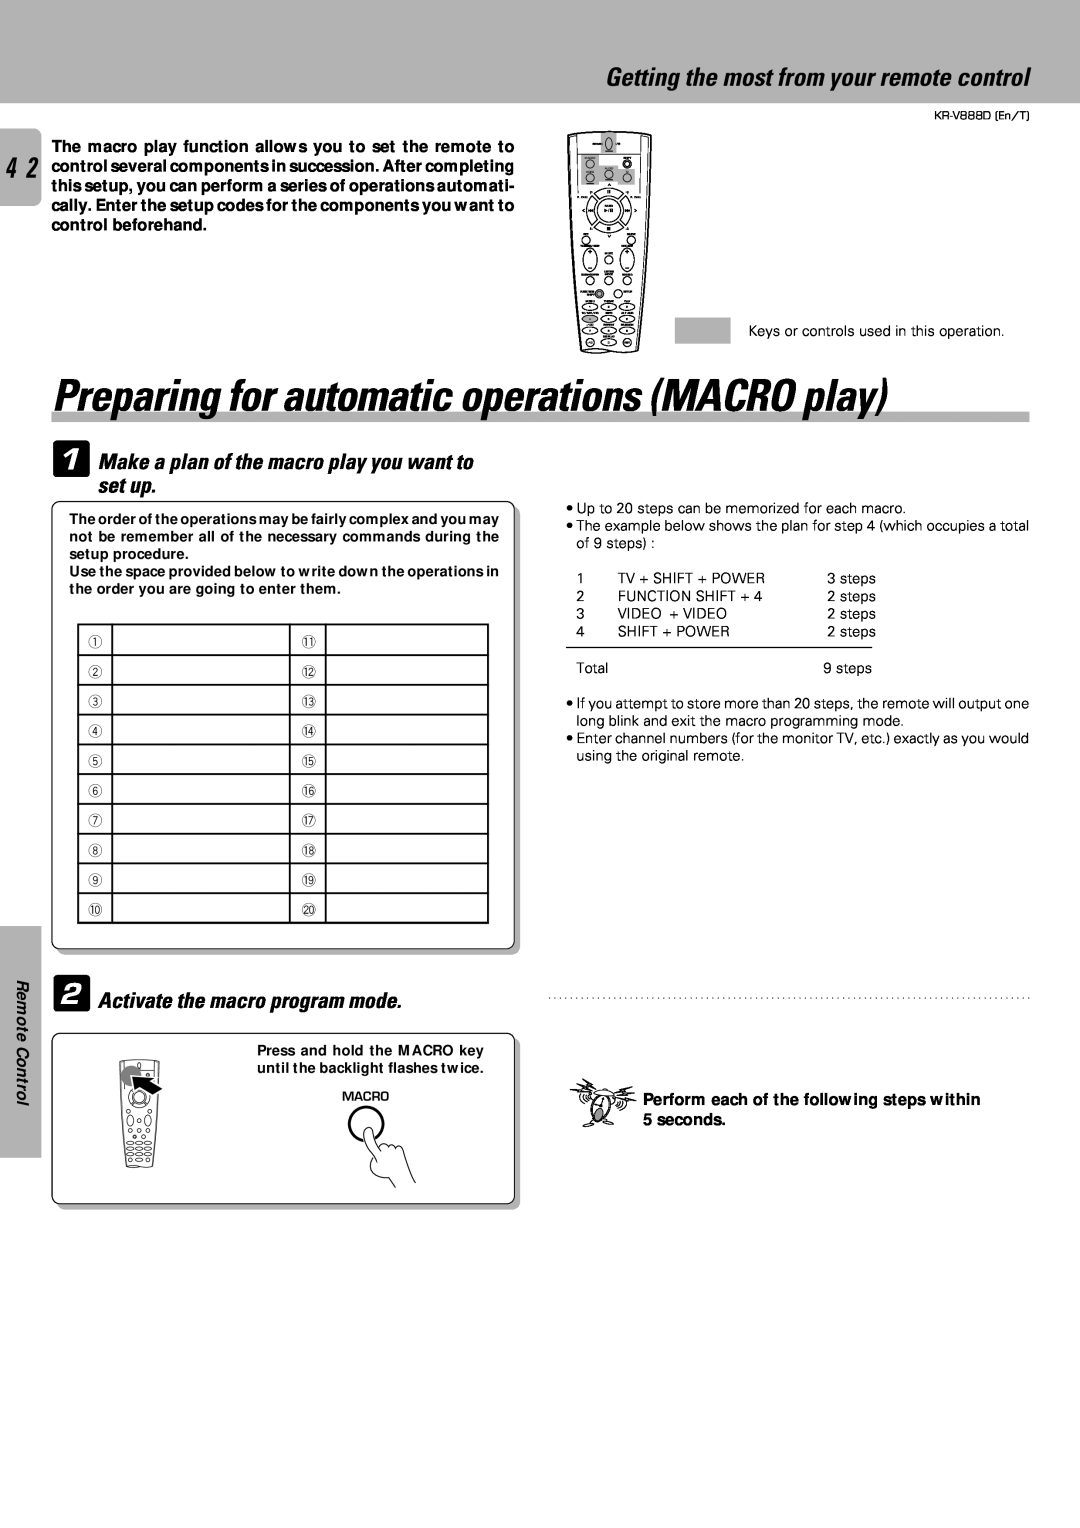 Kenwood KR-V888D Preparing for automatic operations MACRO play, 1Make a plan of the macro play you want to set up 